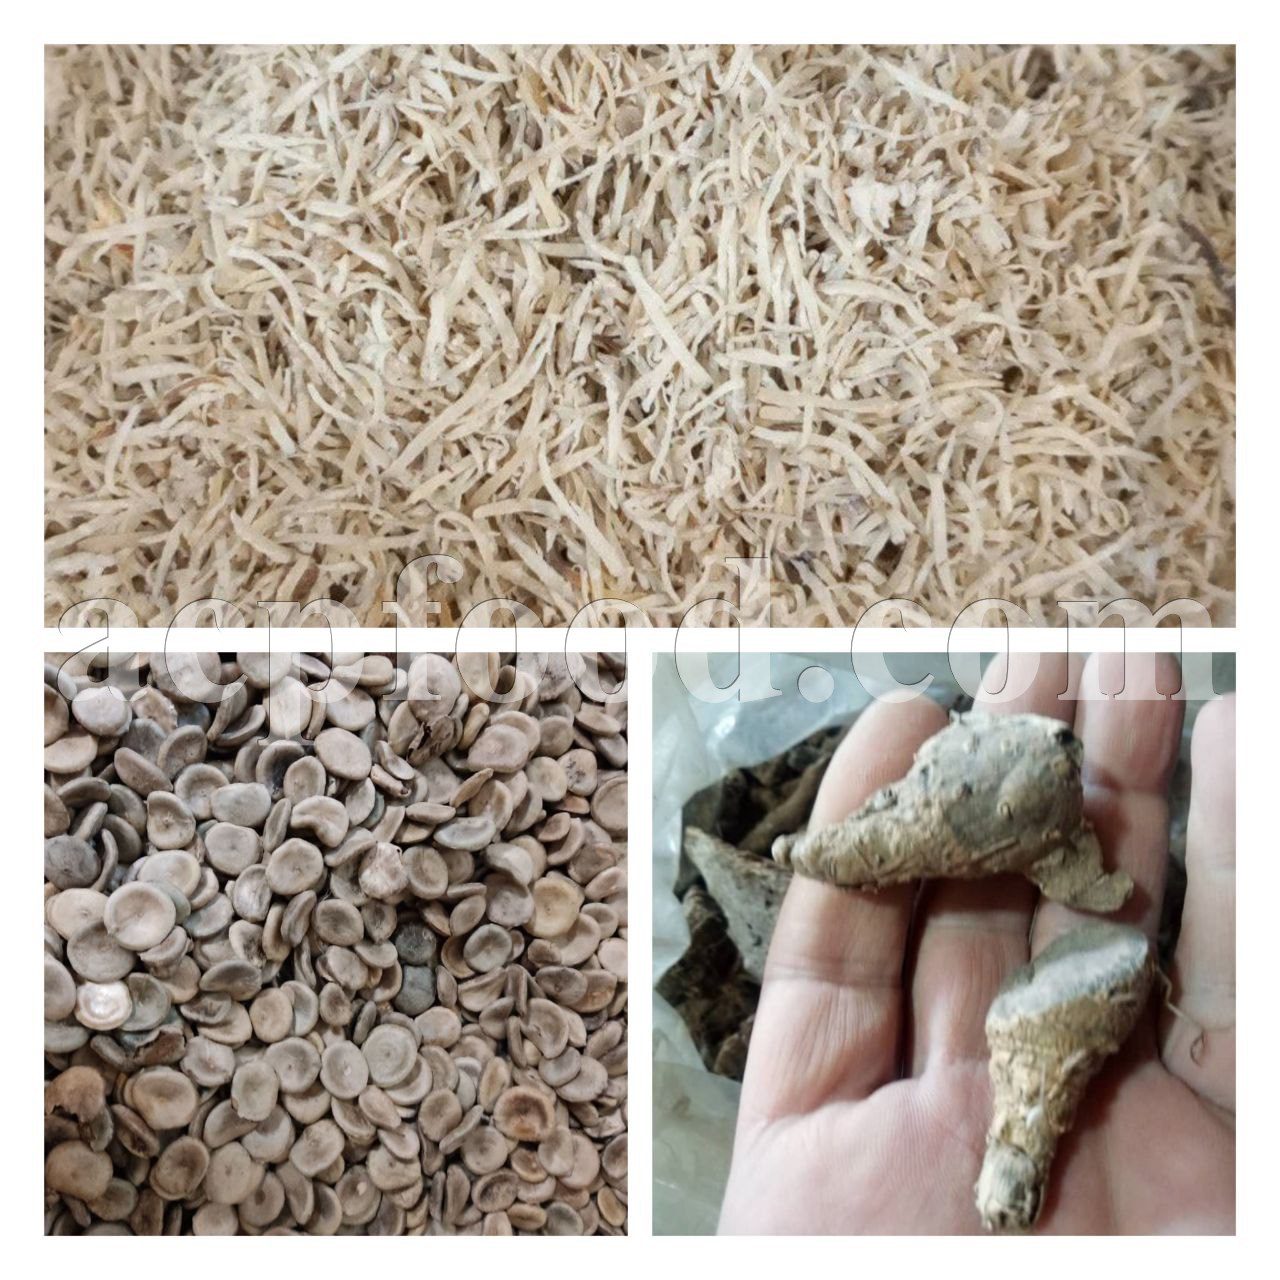 Nux Vomica seeds and roots for sale.